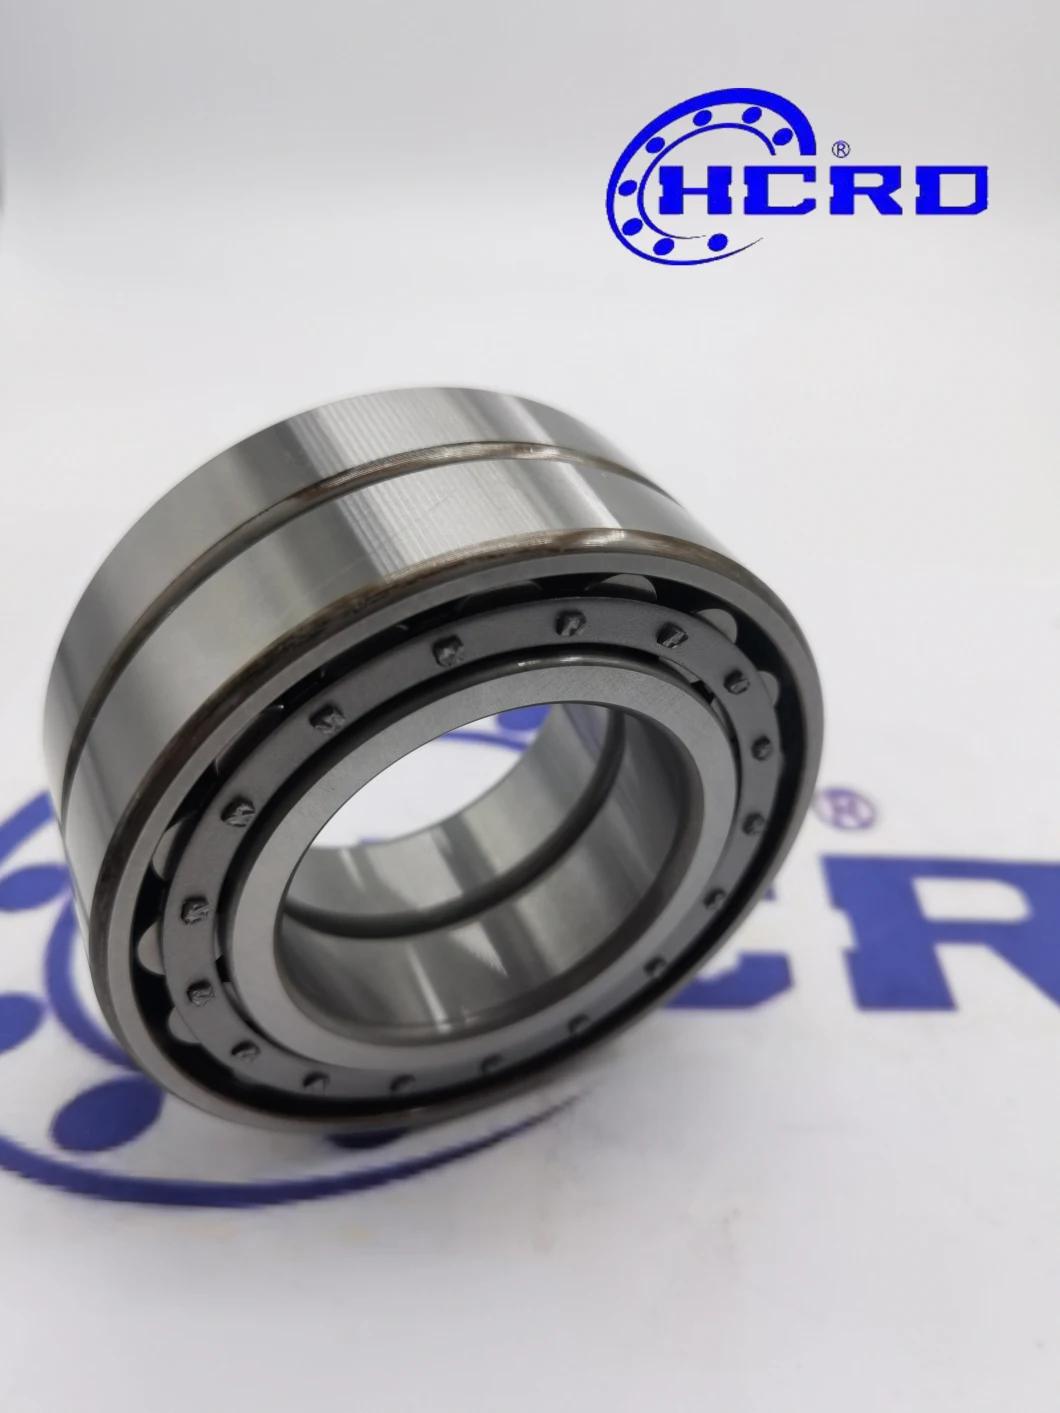 Good Price Wholesale/Thrust Bearing/Angular Contact/Ball Bearing/Spherical/Cylinder/Spherical Roller/Motorcycle/Agricultural Machinery/Machinery